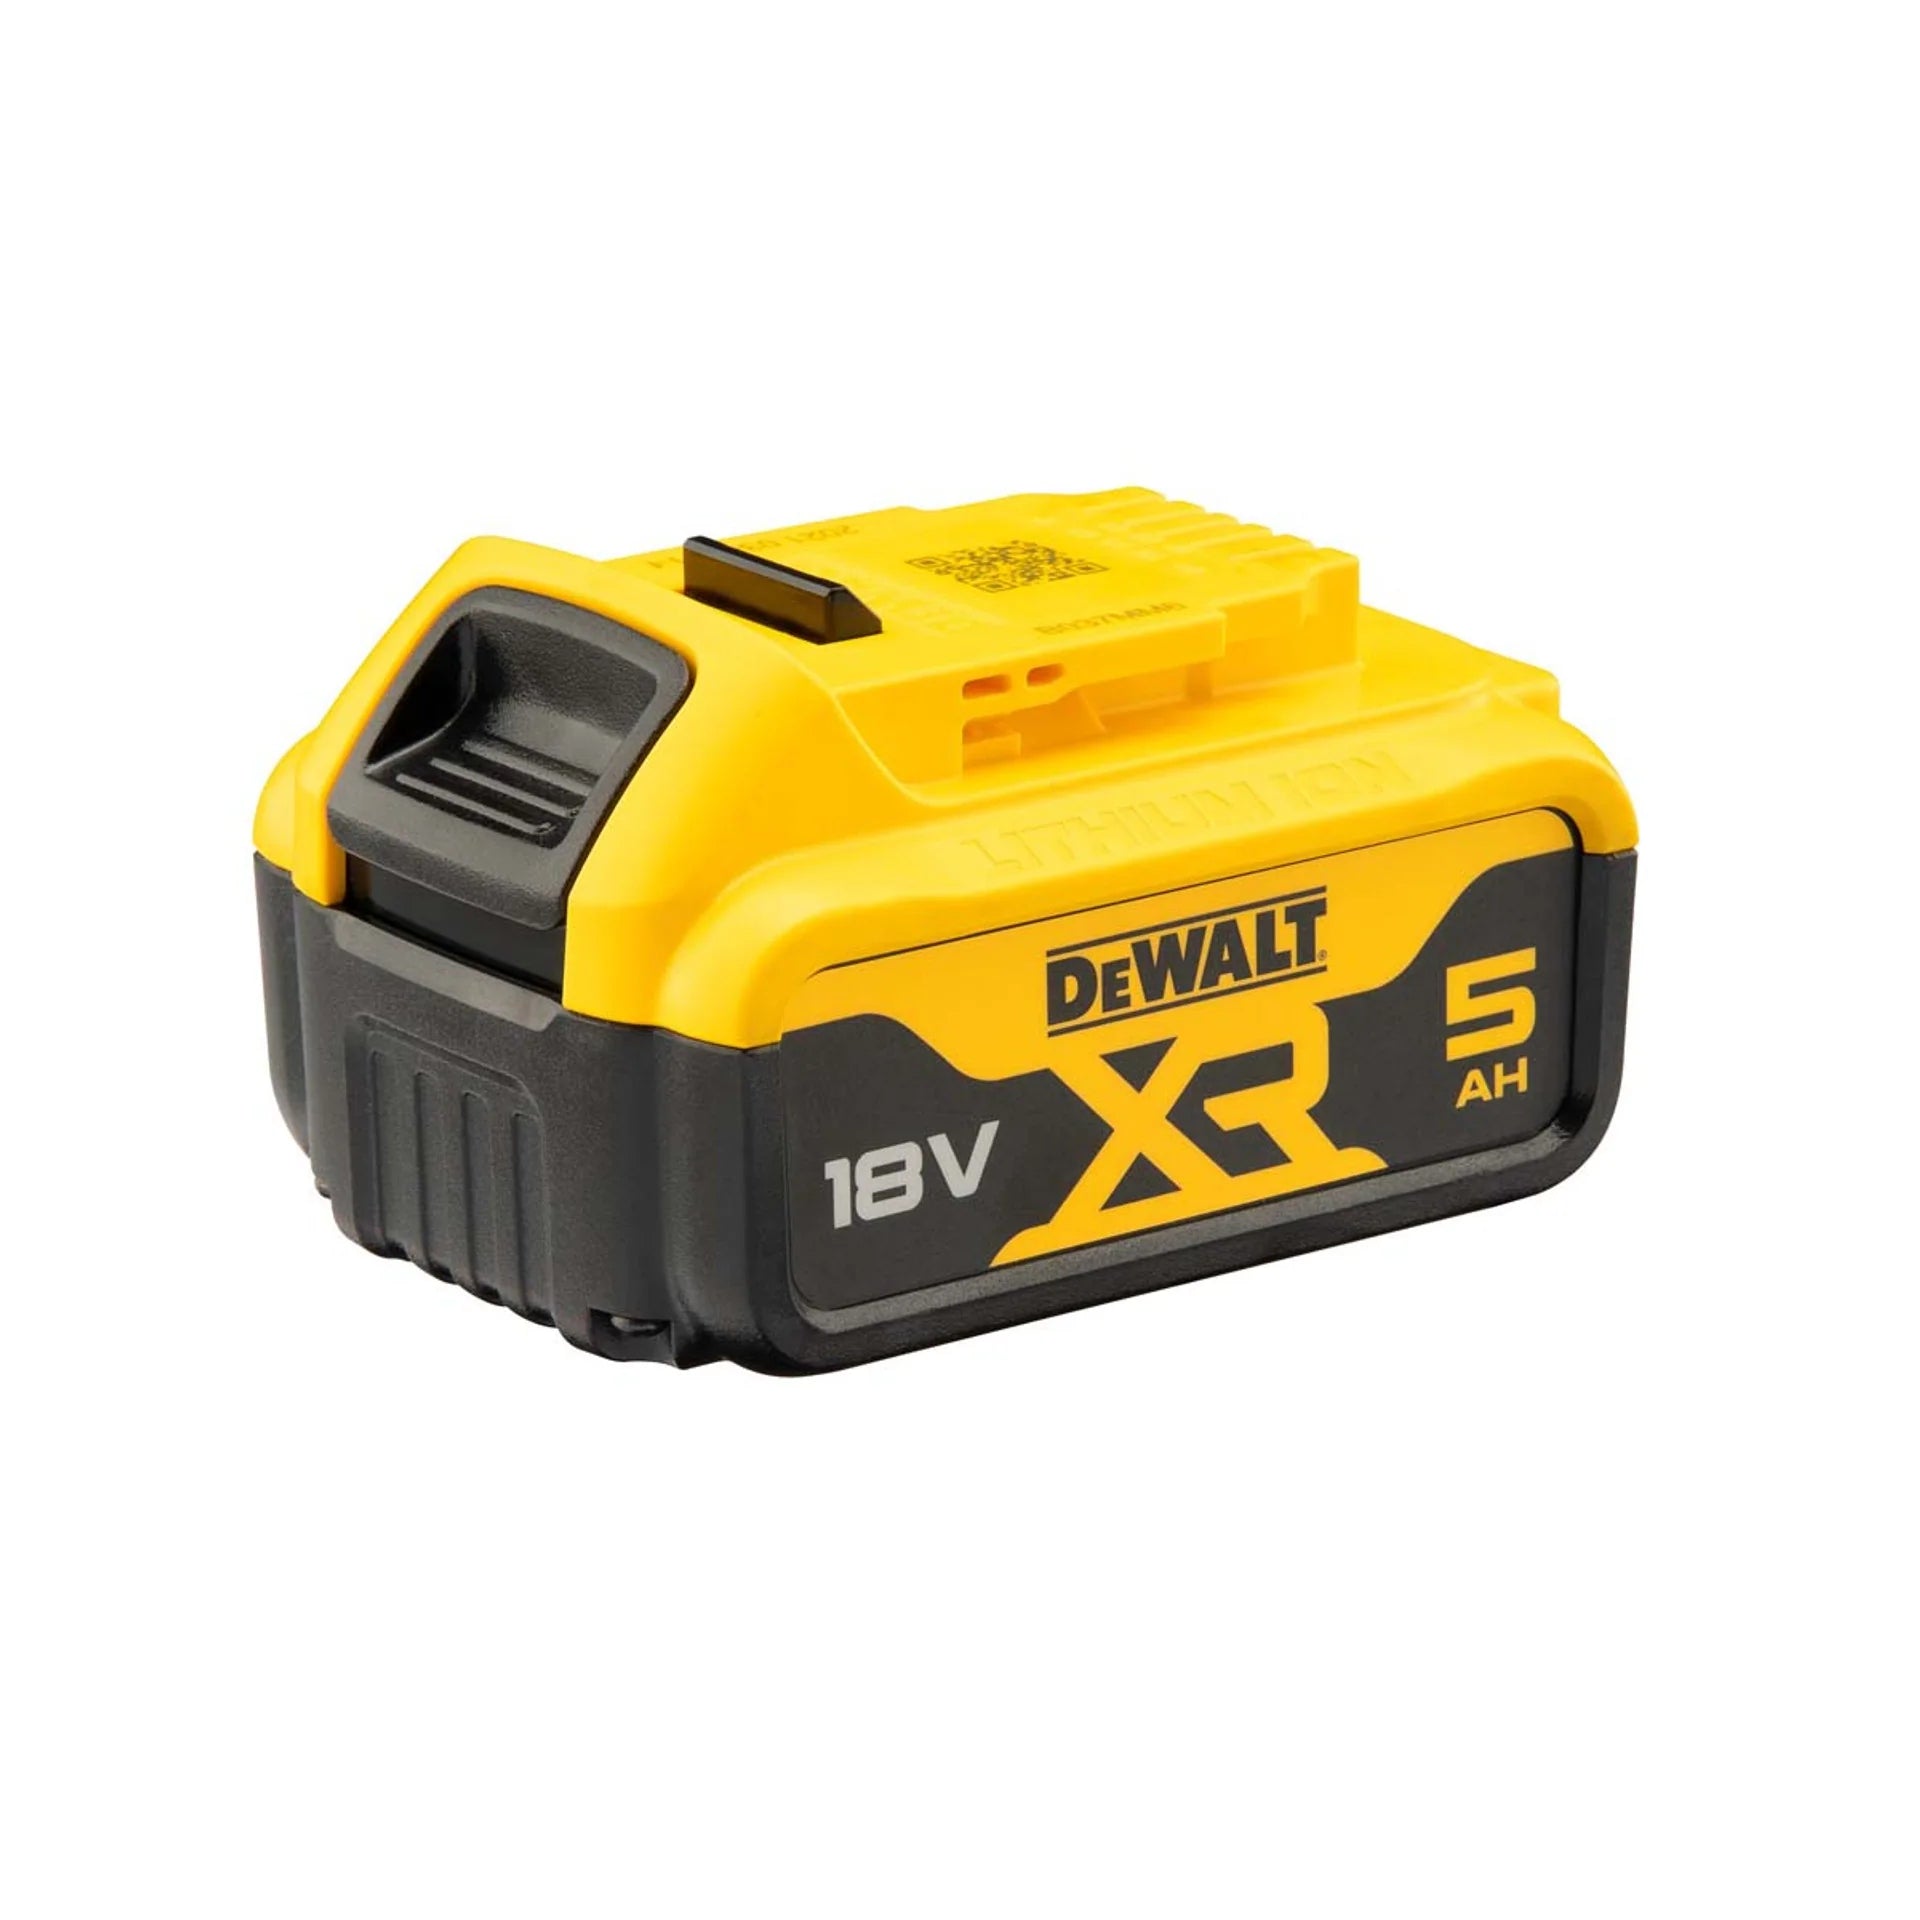 Dewalt DCK2071P2T 18V SDS Plus Hammer Drill & Combi Drill with 2 x 5.0Ah Battery Charger In Case